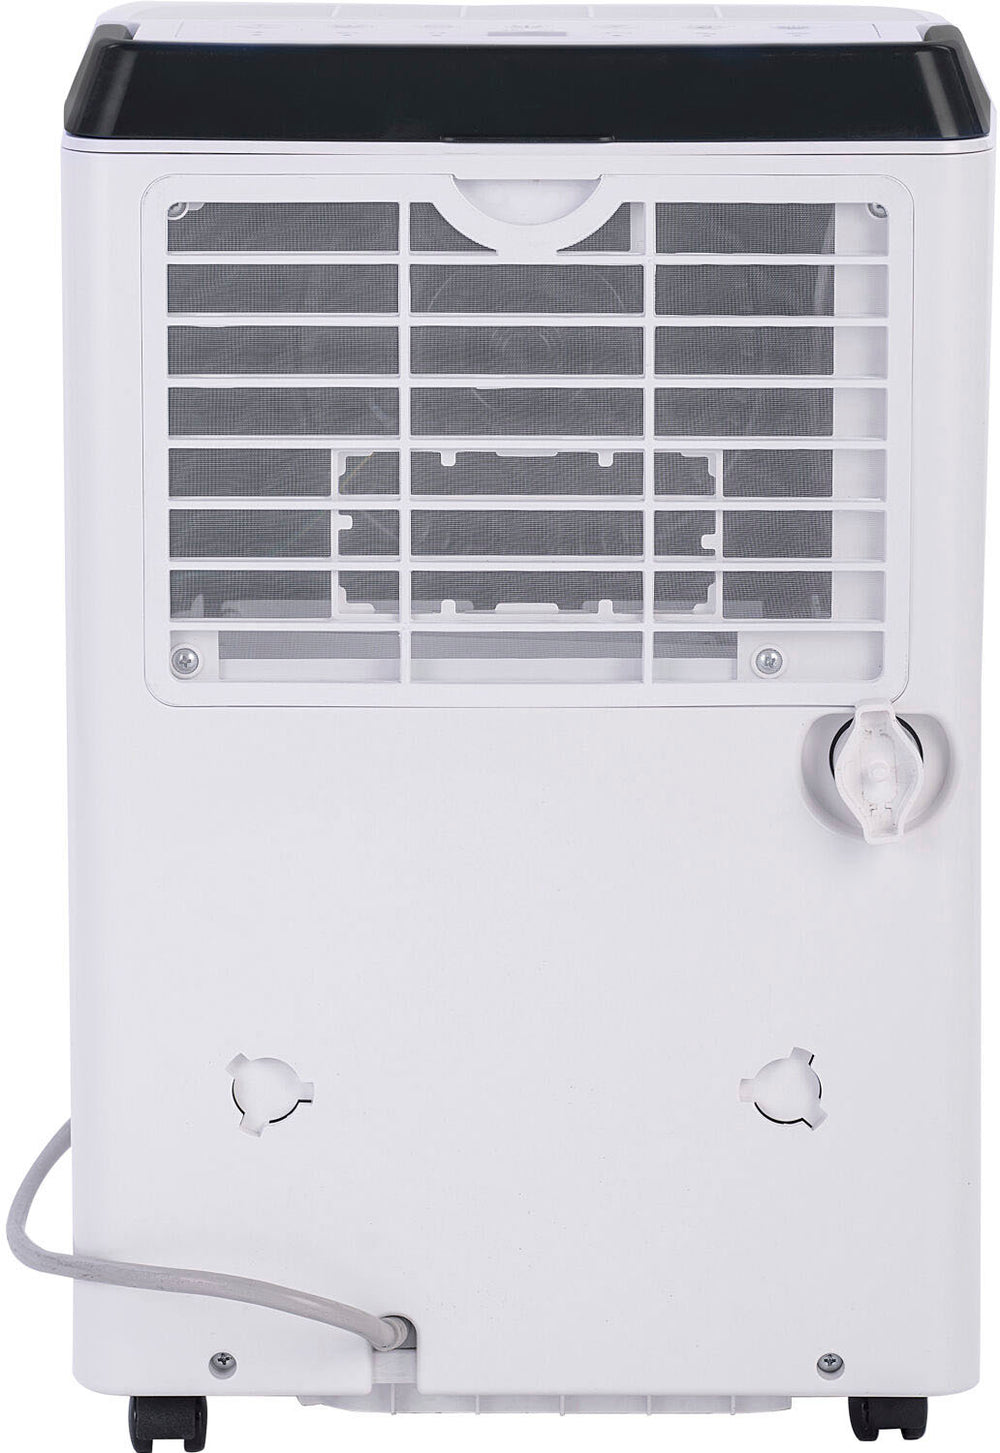 Honeywell - 70 pint Smart Wi-Fi Energy Star Dehumidifier for Basement & Large Room Up to 4000 Sq. Ft. - White_1